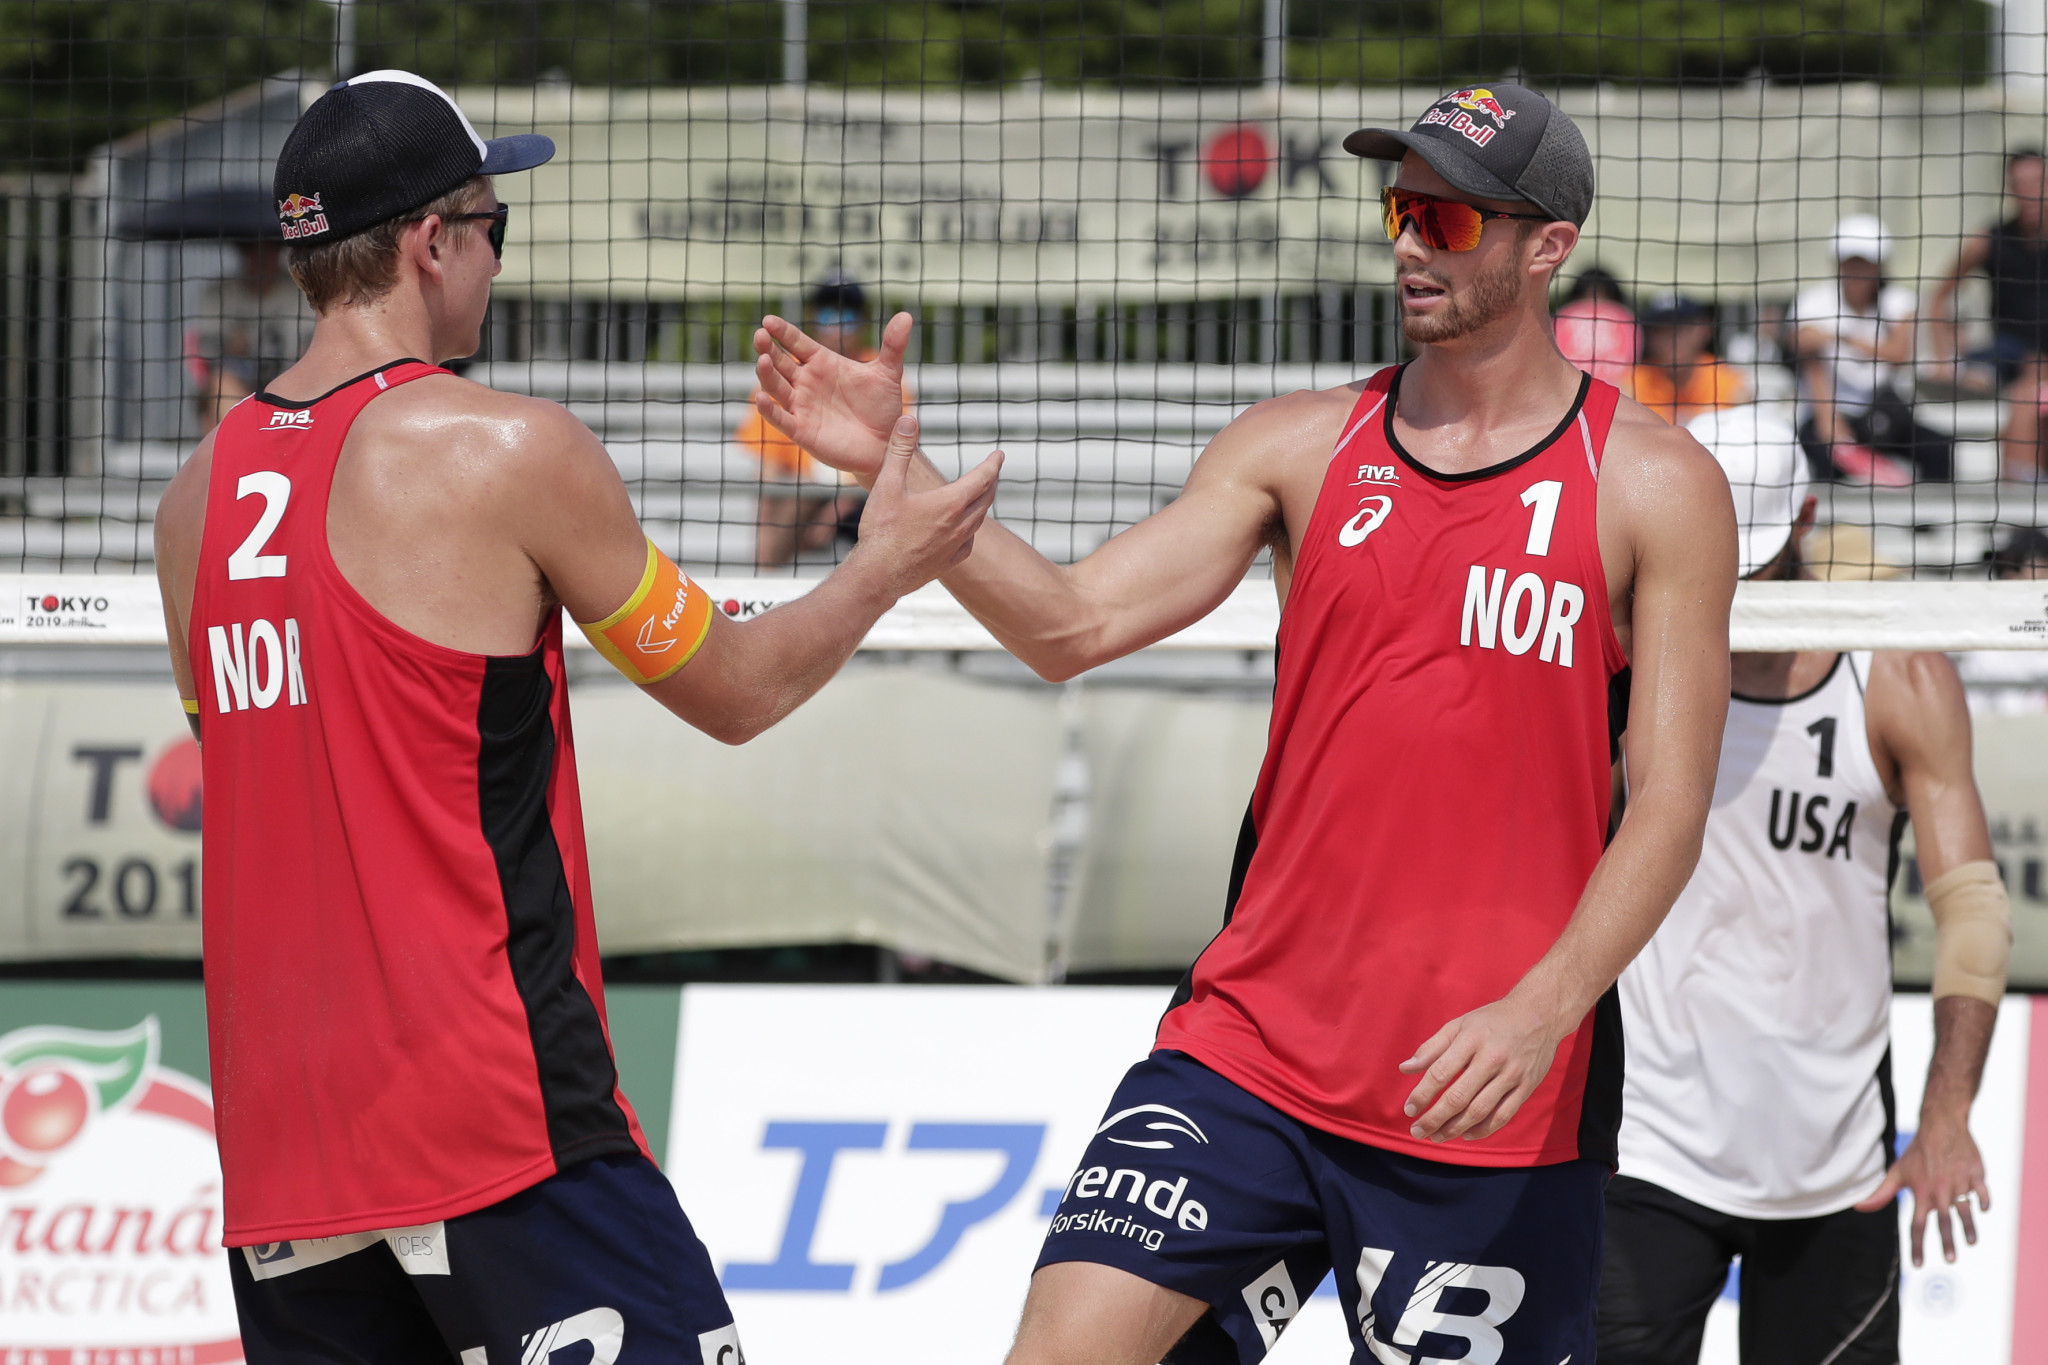 Mol and Sørum win Cancun opener in first FIVB World Tour match together in 18 months